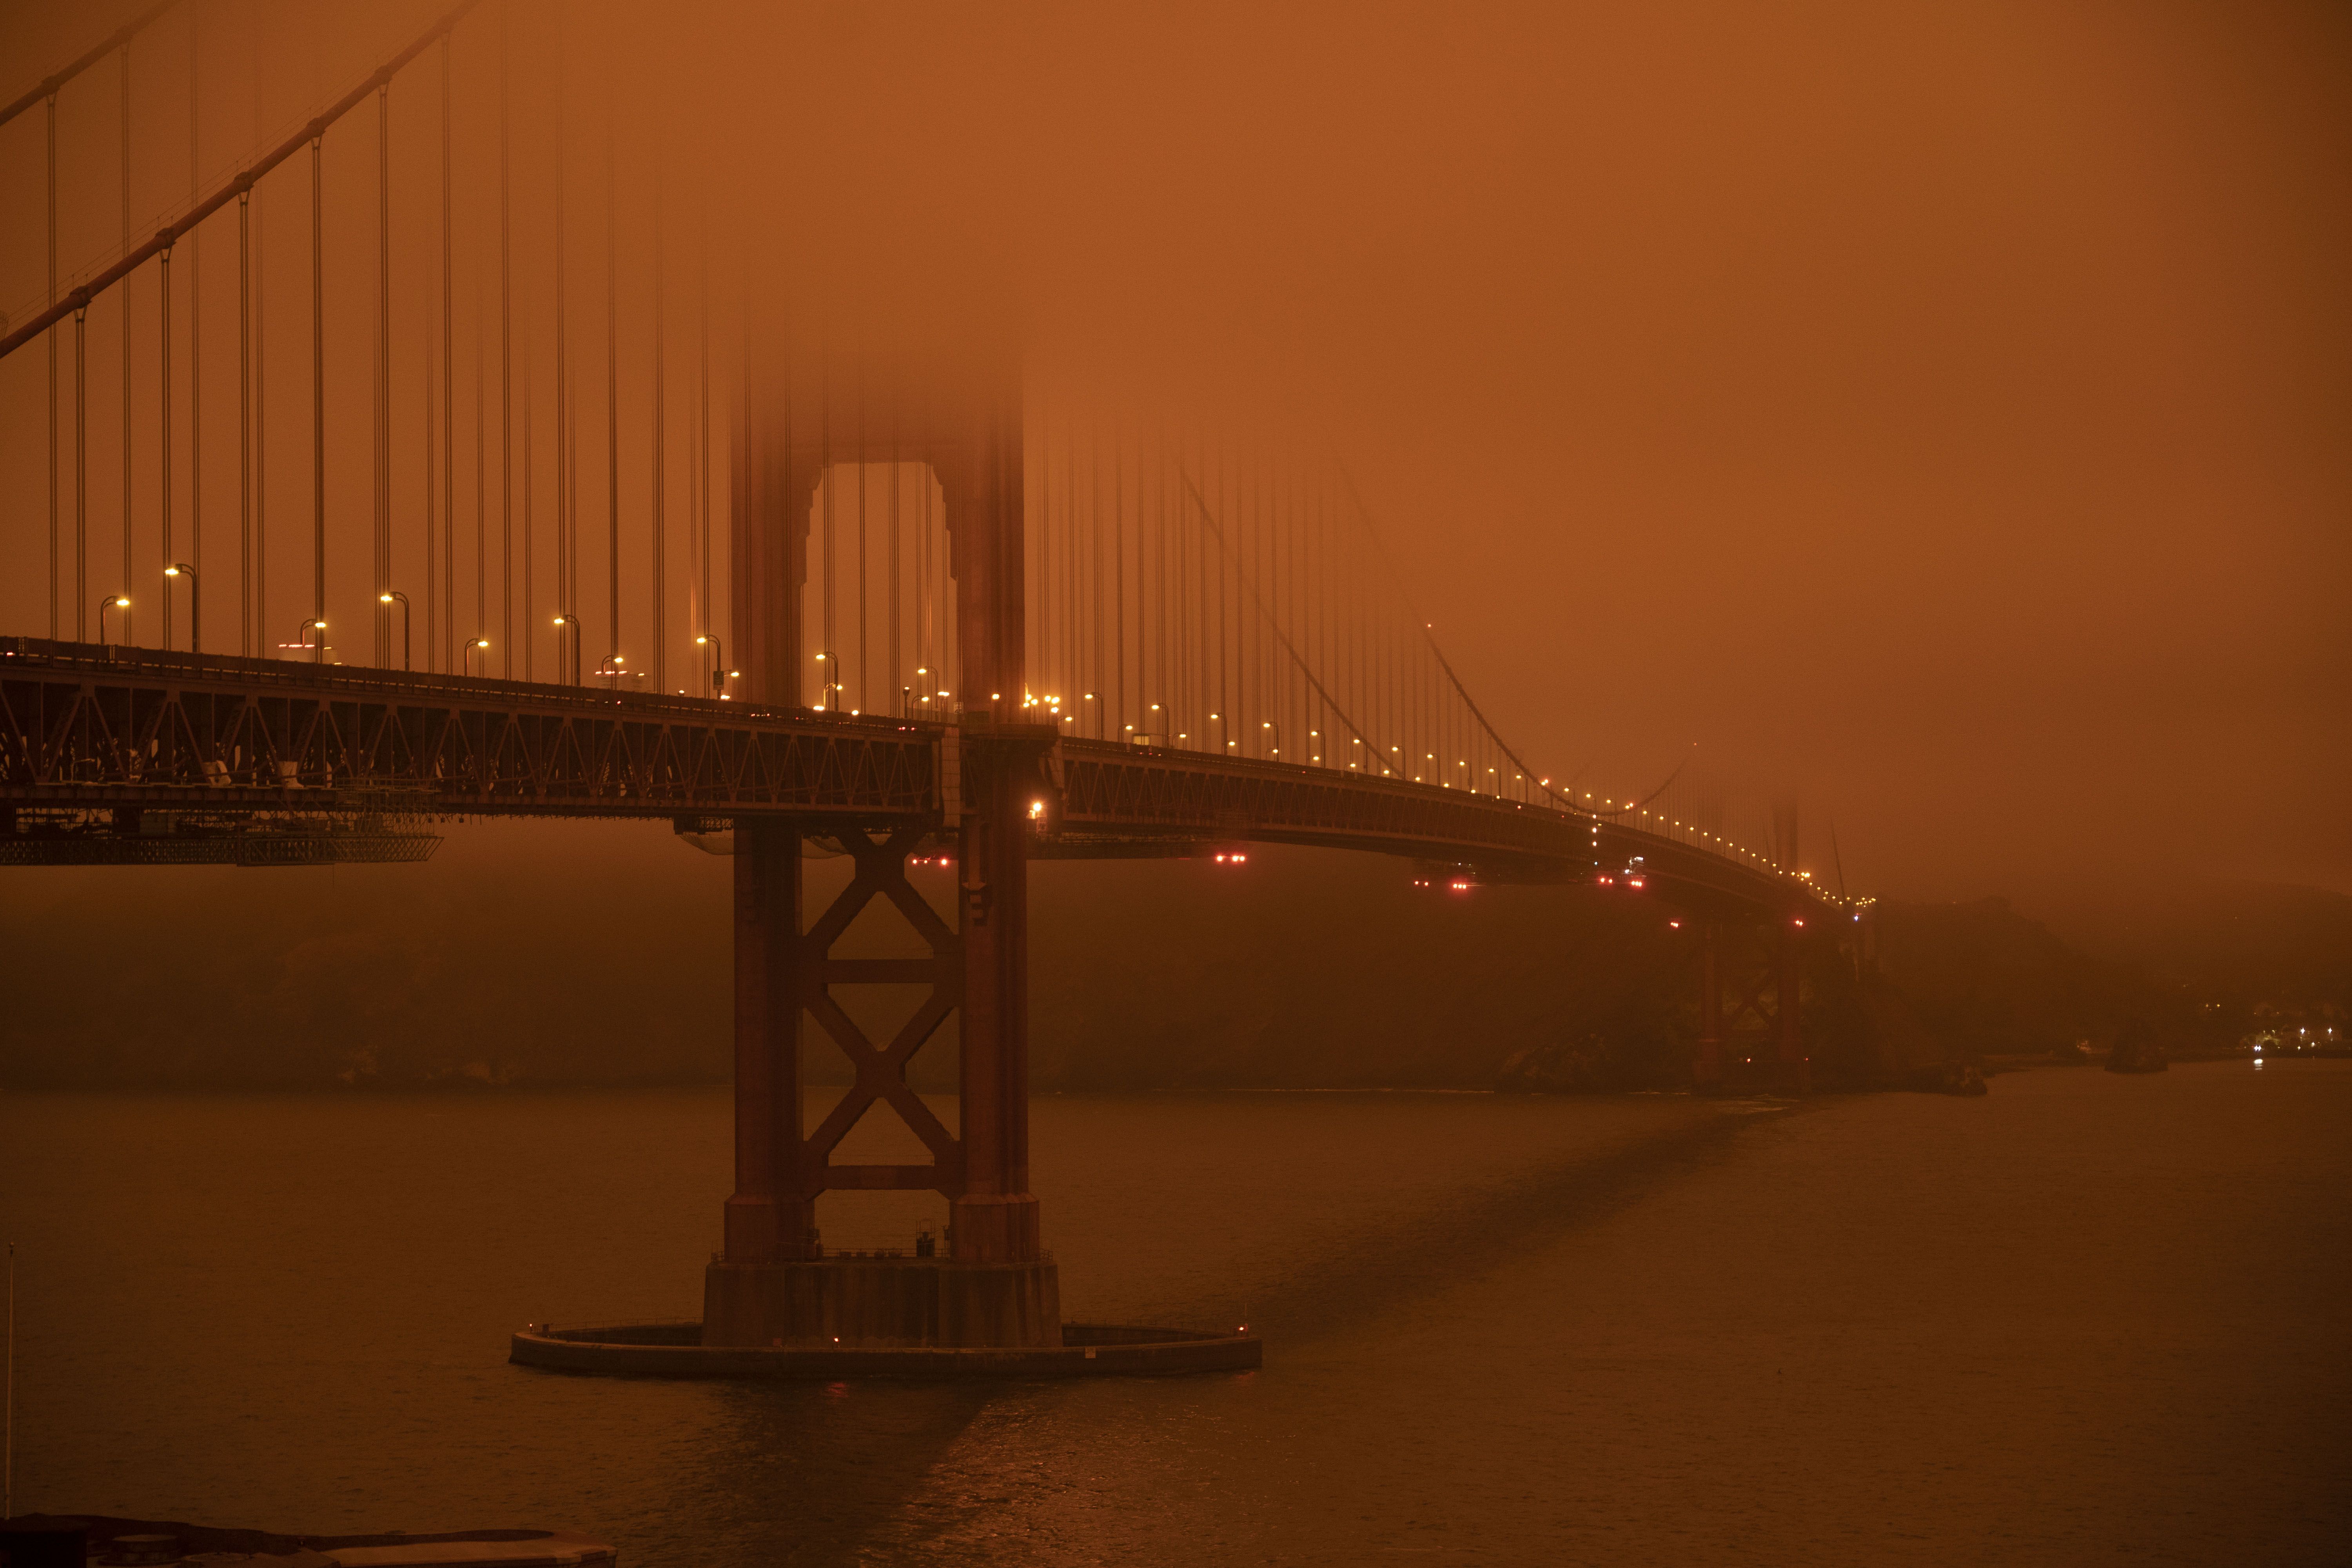 Cars drive along the Golden Gate Bridge under an orange smoke filled sky at midday in San Francisco